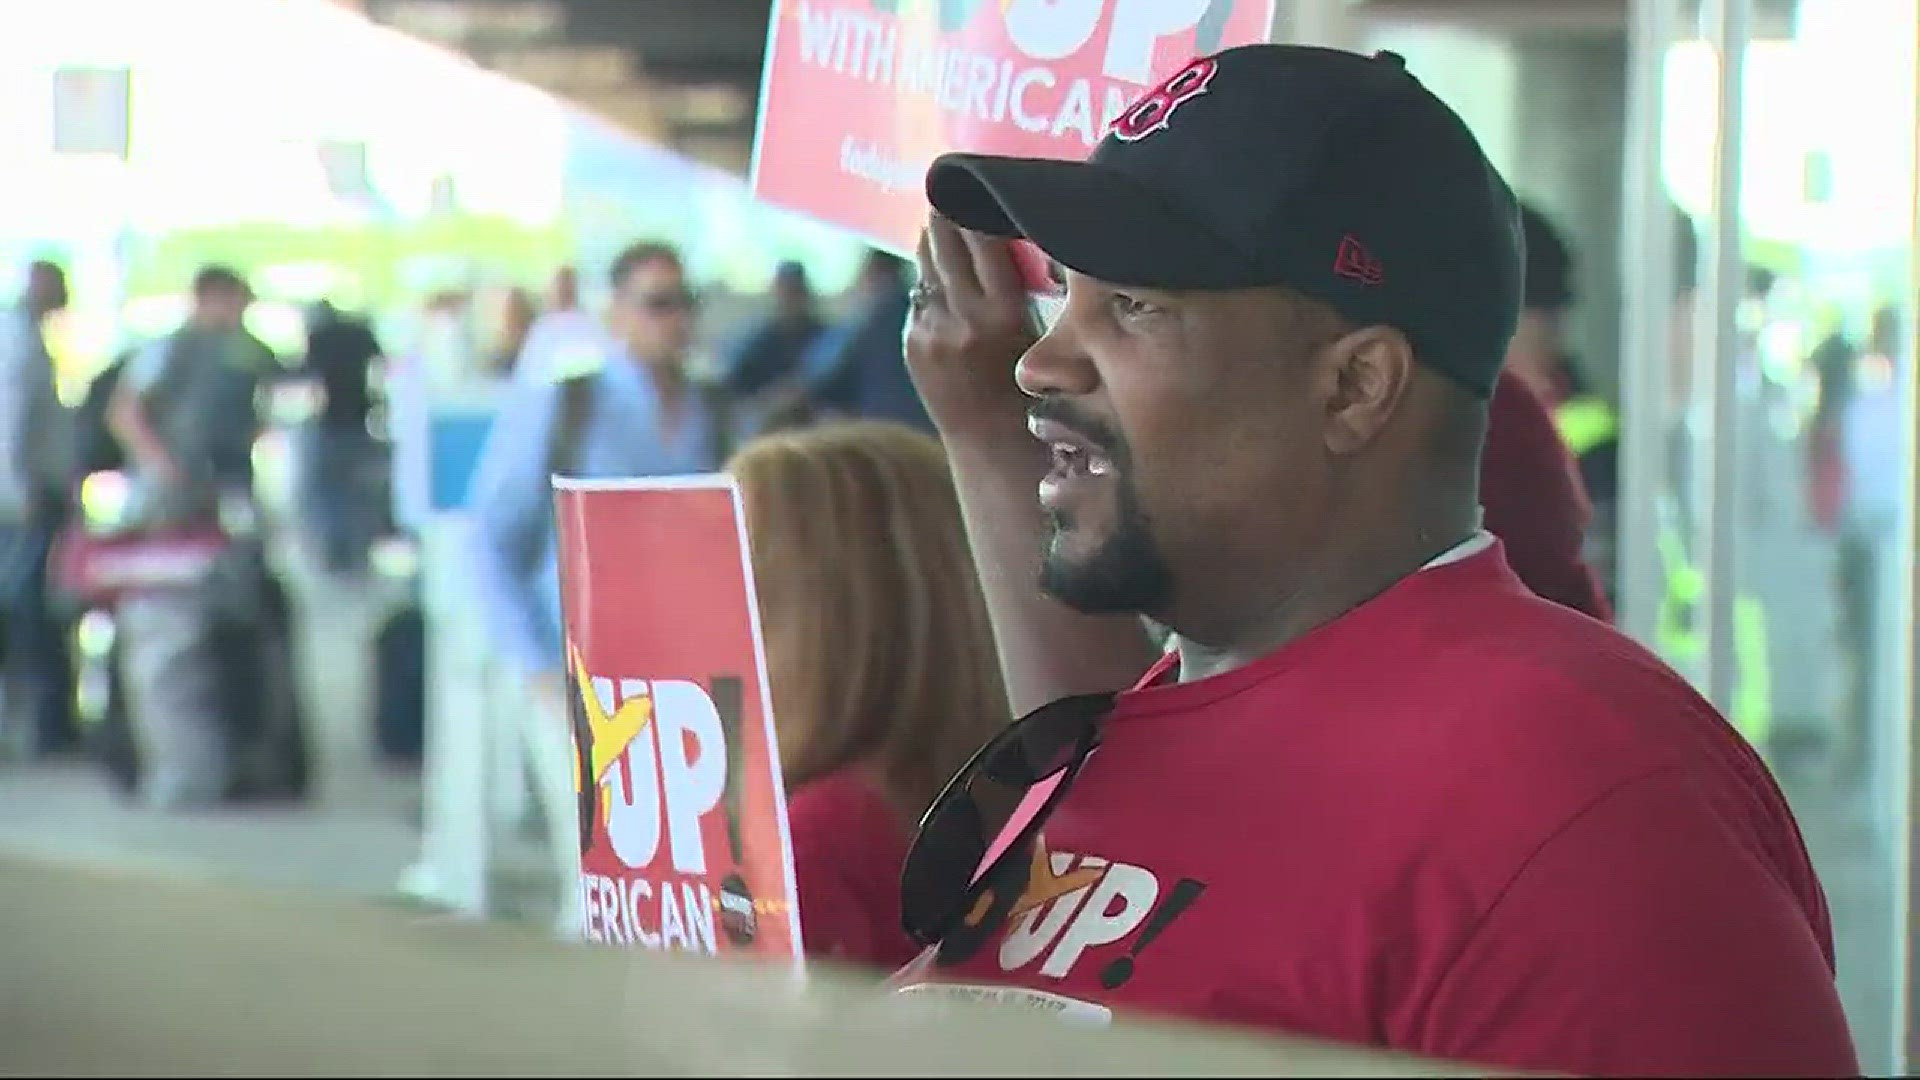 Workers who provide airline meals protested outside Charlotte Douglas Airport Sunday morning, saying airlines make billions but they barely make a living wage.